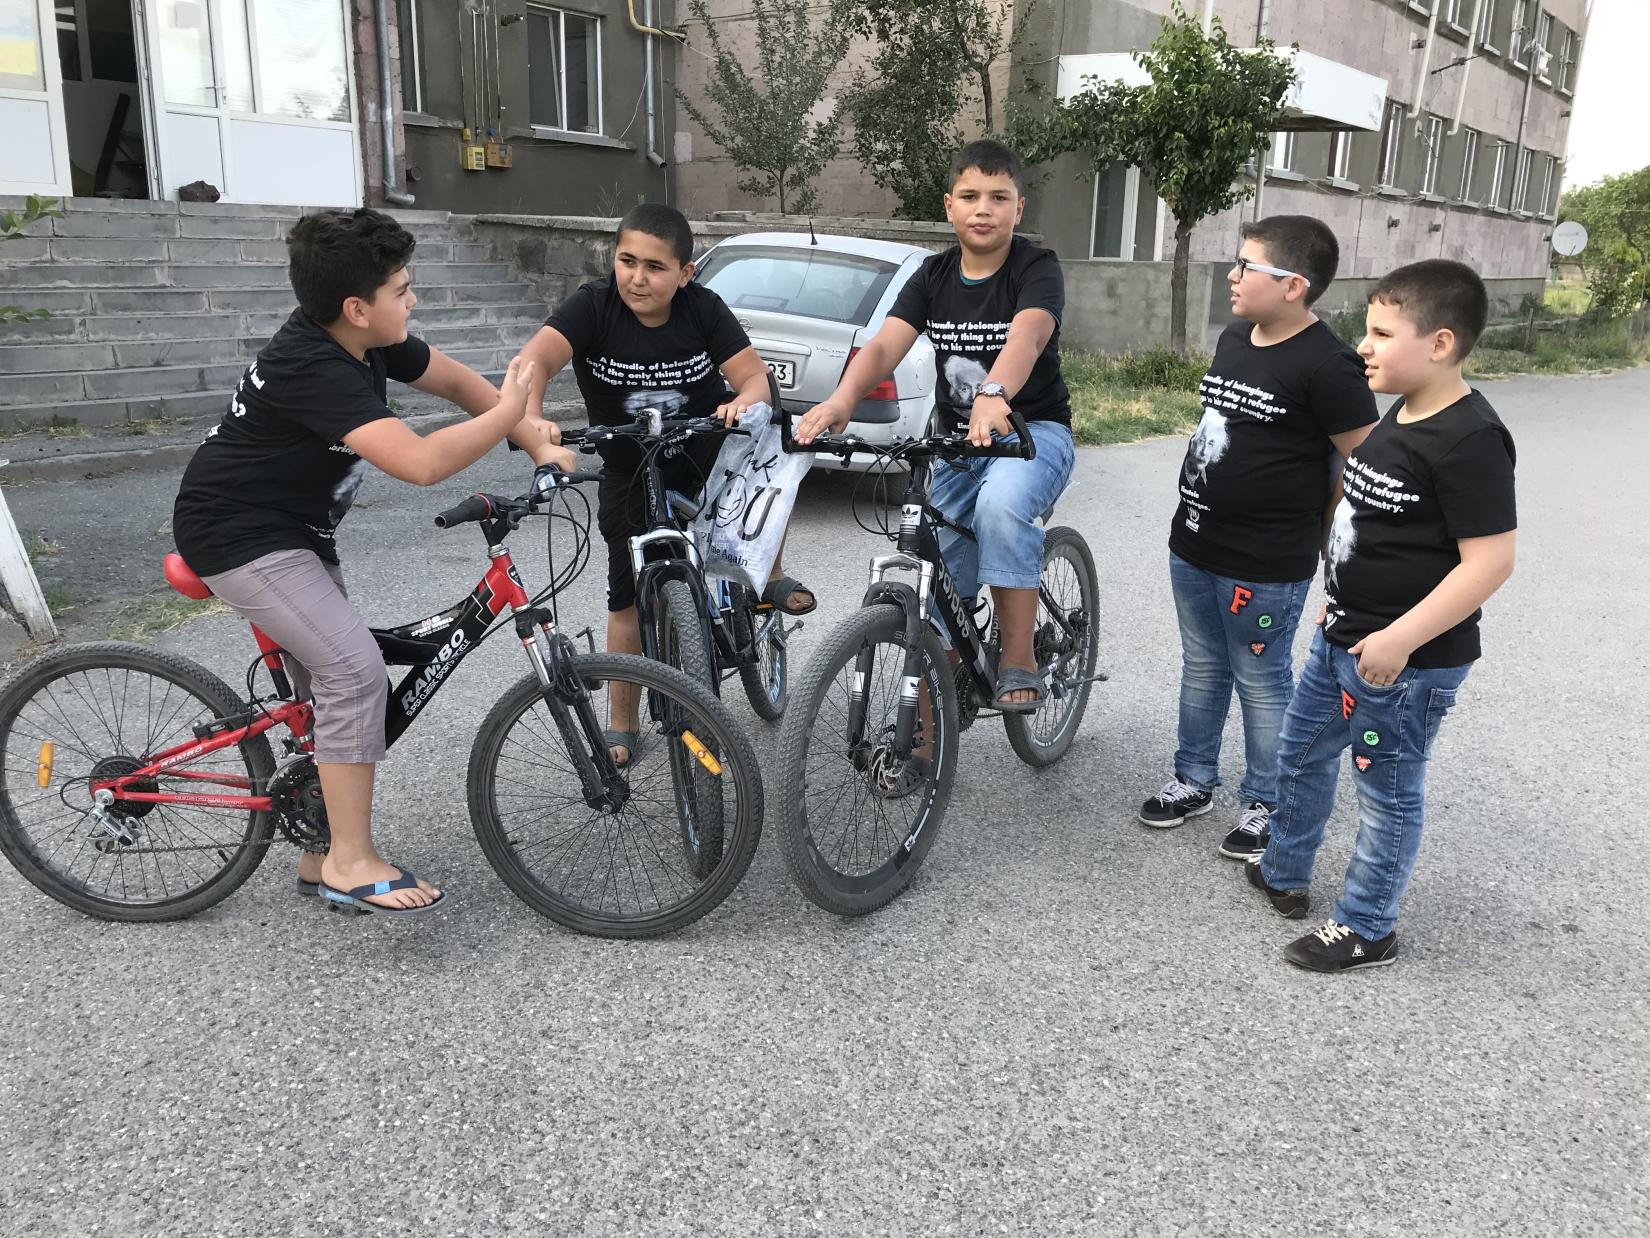 A group of young bikers gathered for an important discourse in their Albert Einstein T-shirts.